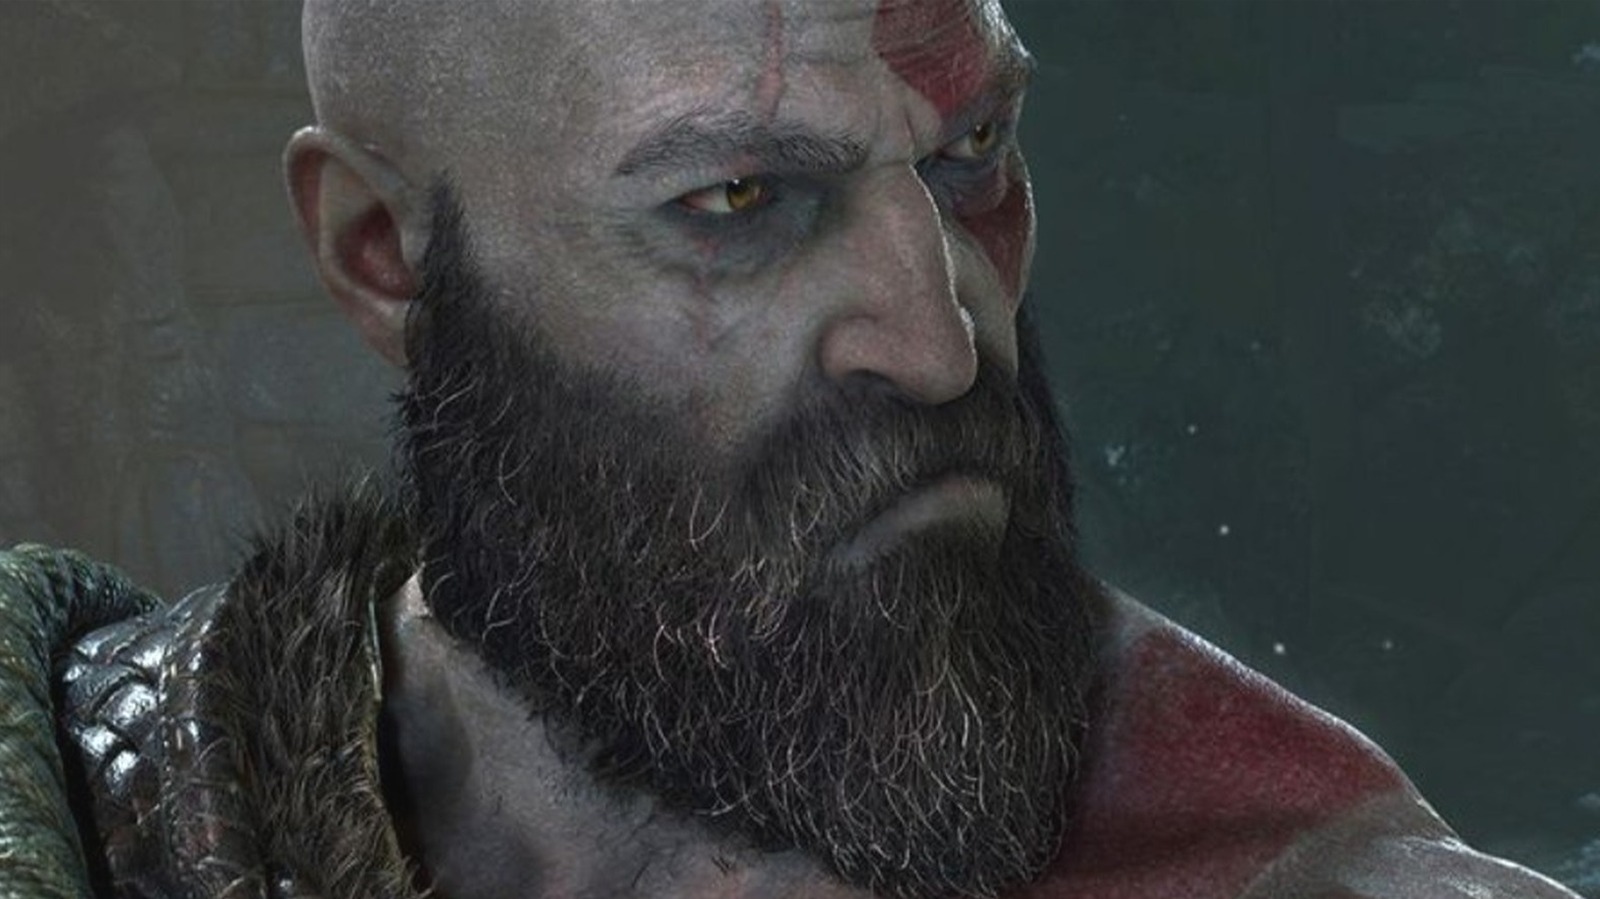 The Story of Kratos explained (God of War Story: 2005 - 2013)